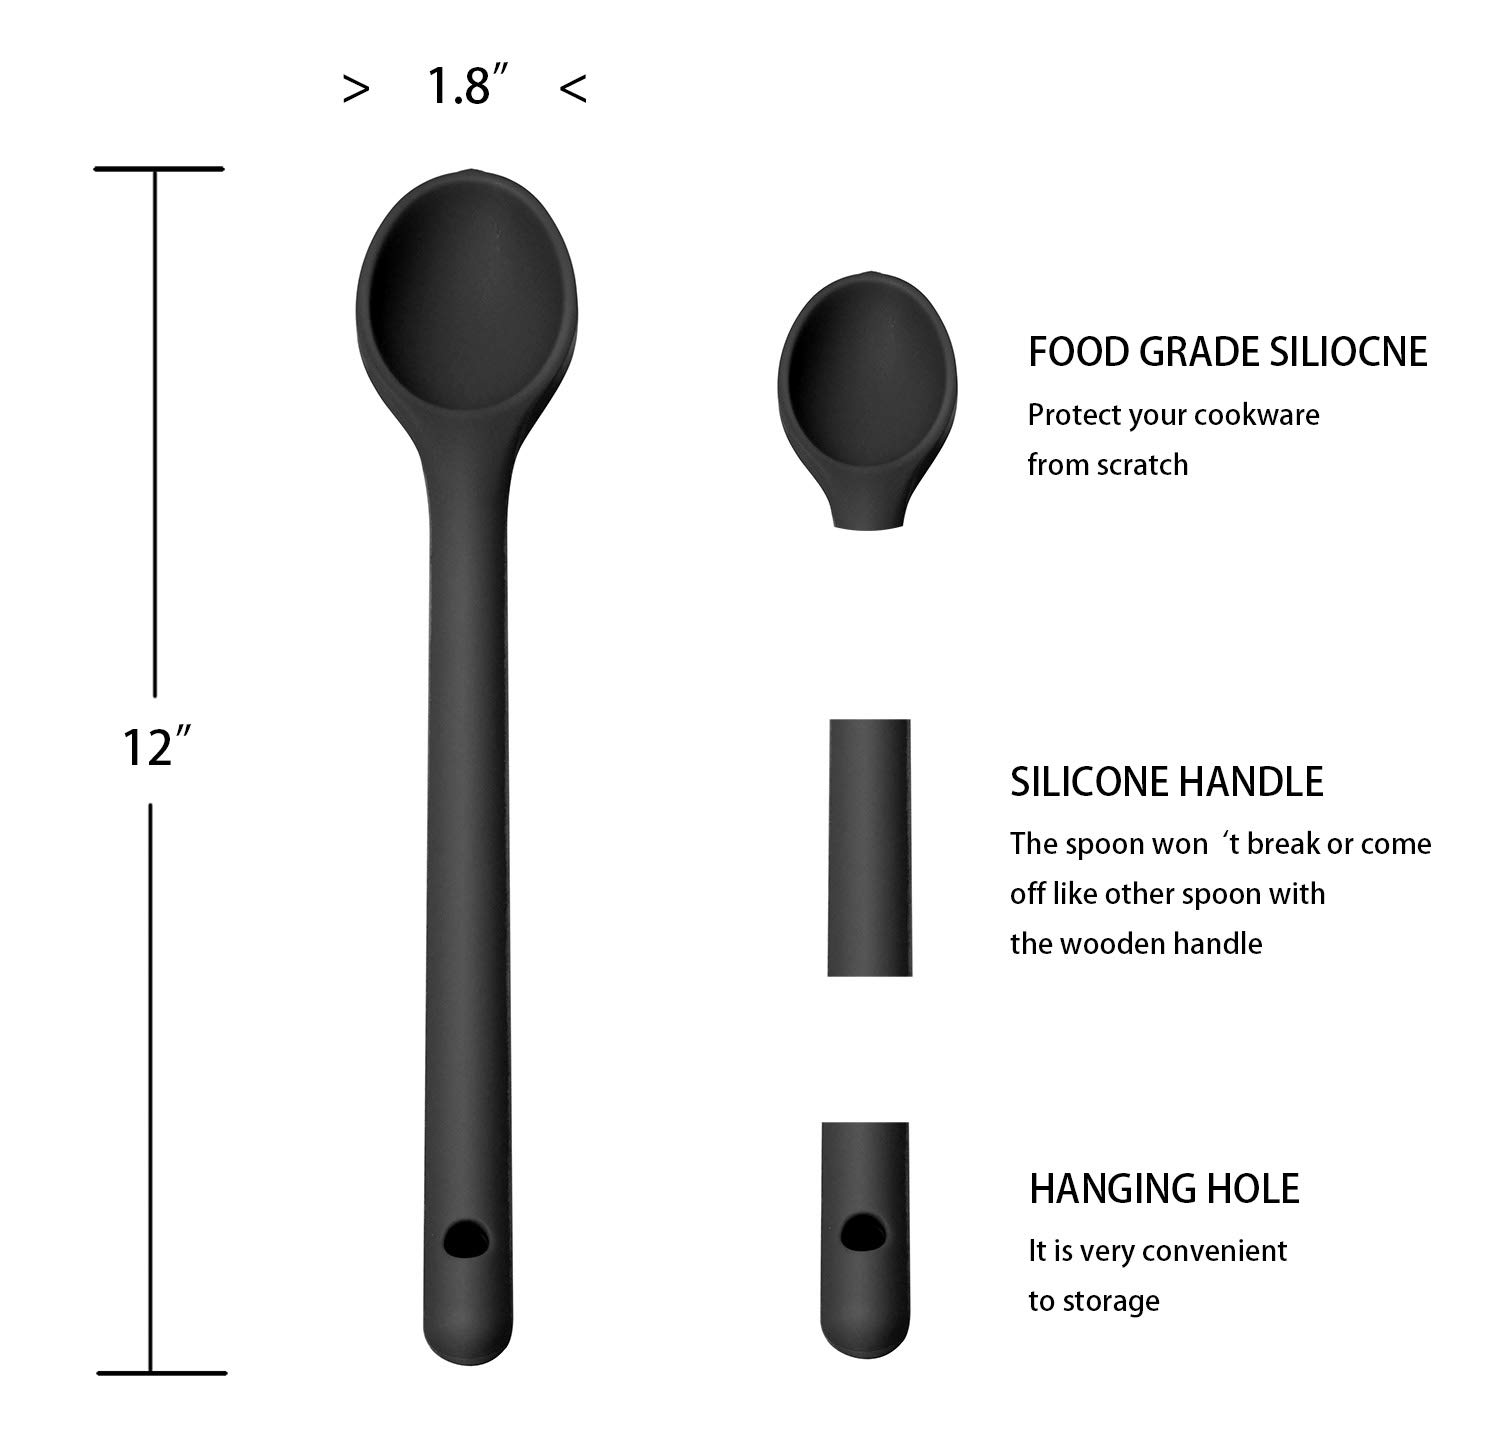 Stirring Spoons for Cooking Set of 3, Silicone 12 Inch Long Handle Spoons, Nonstick Mixing Spoons for Cooking, Silicone Stirring Spoons BPA Free, Nontoxic & Resistant to 480°F (2 in Black)